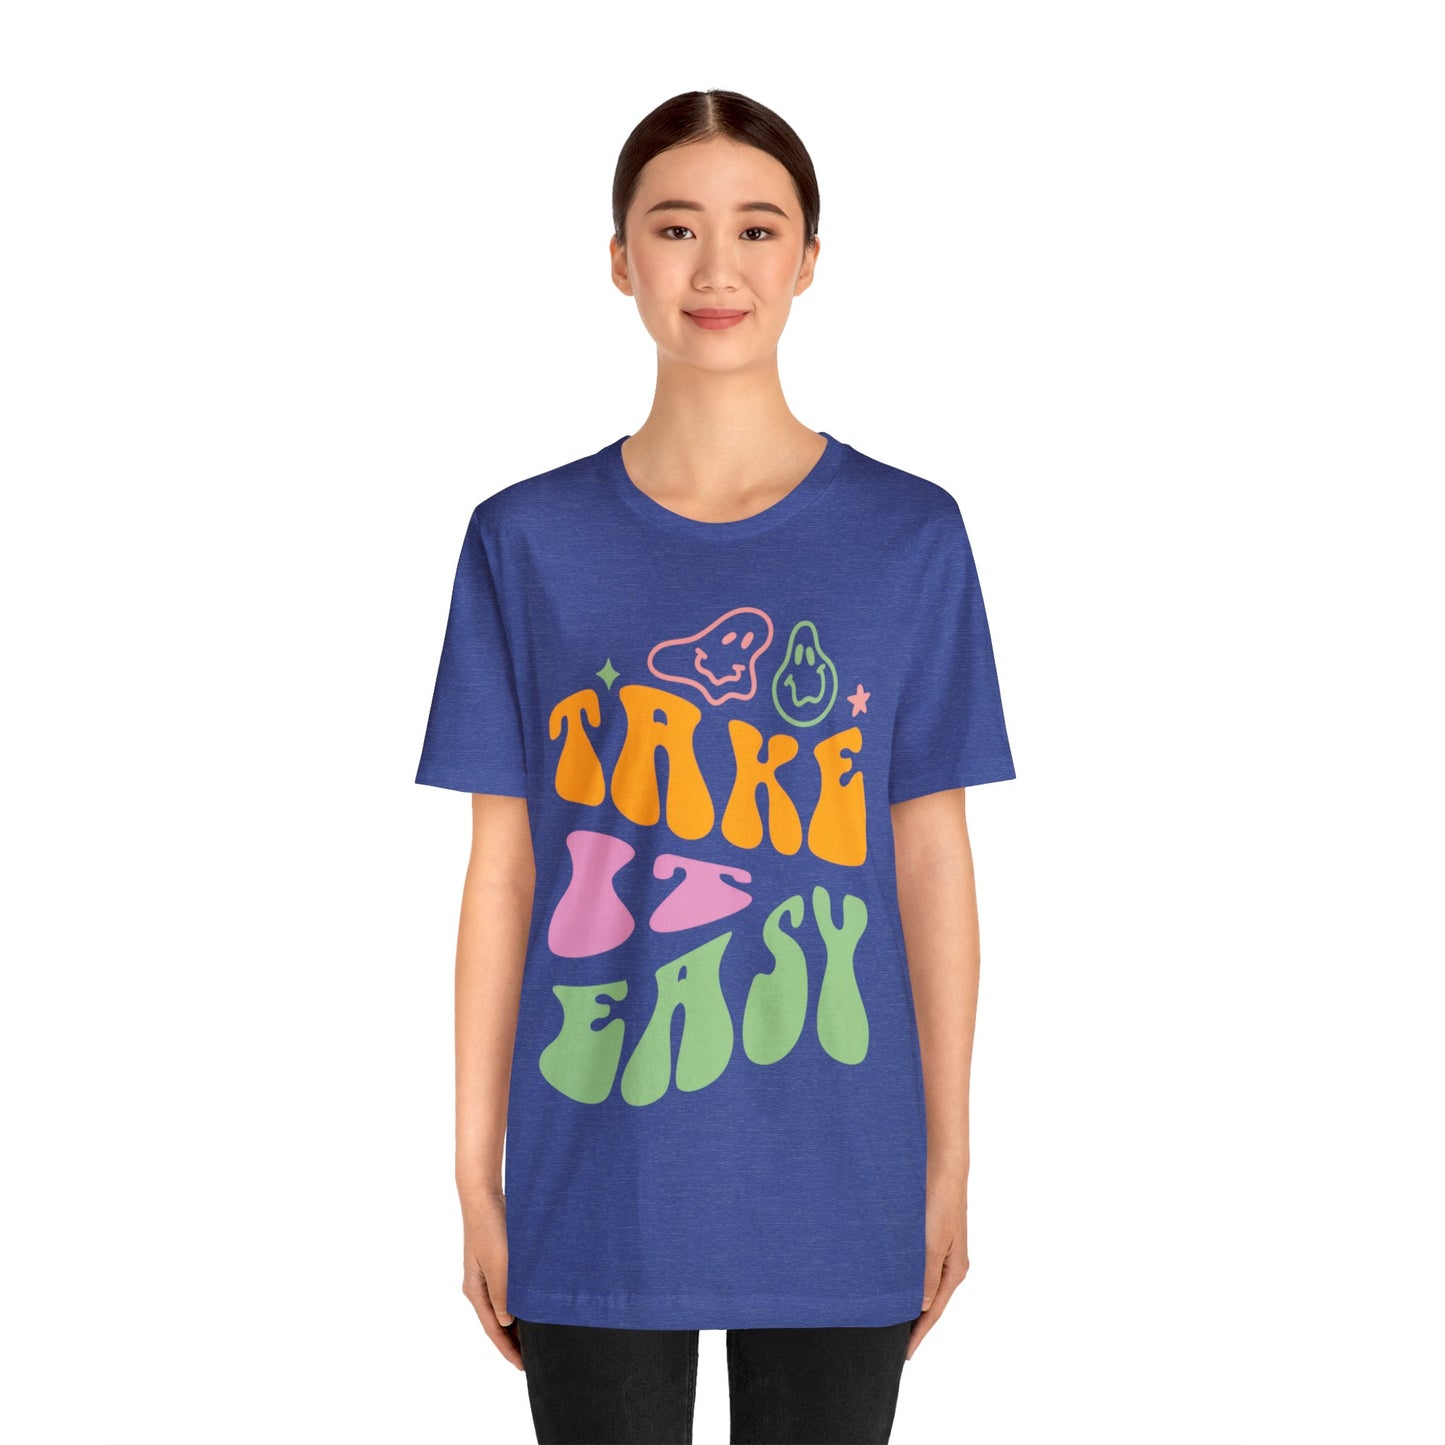 Take It Easy - Graphic T Shirt For Men and Women